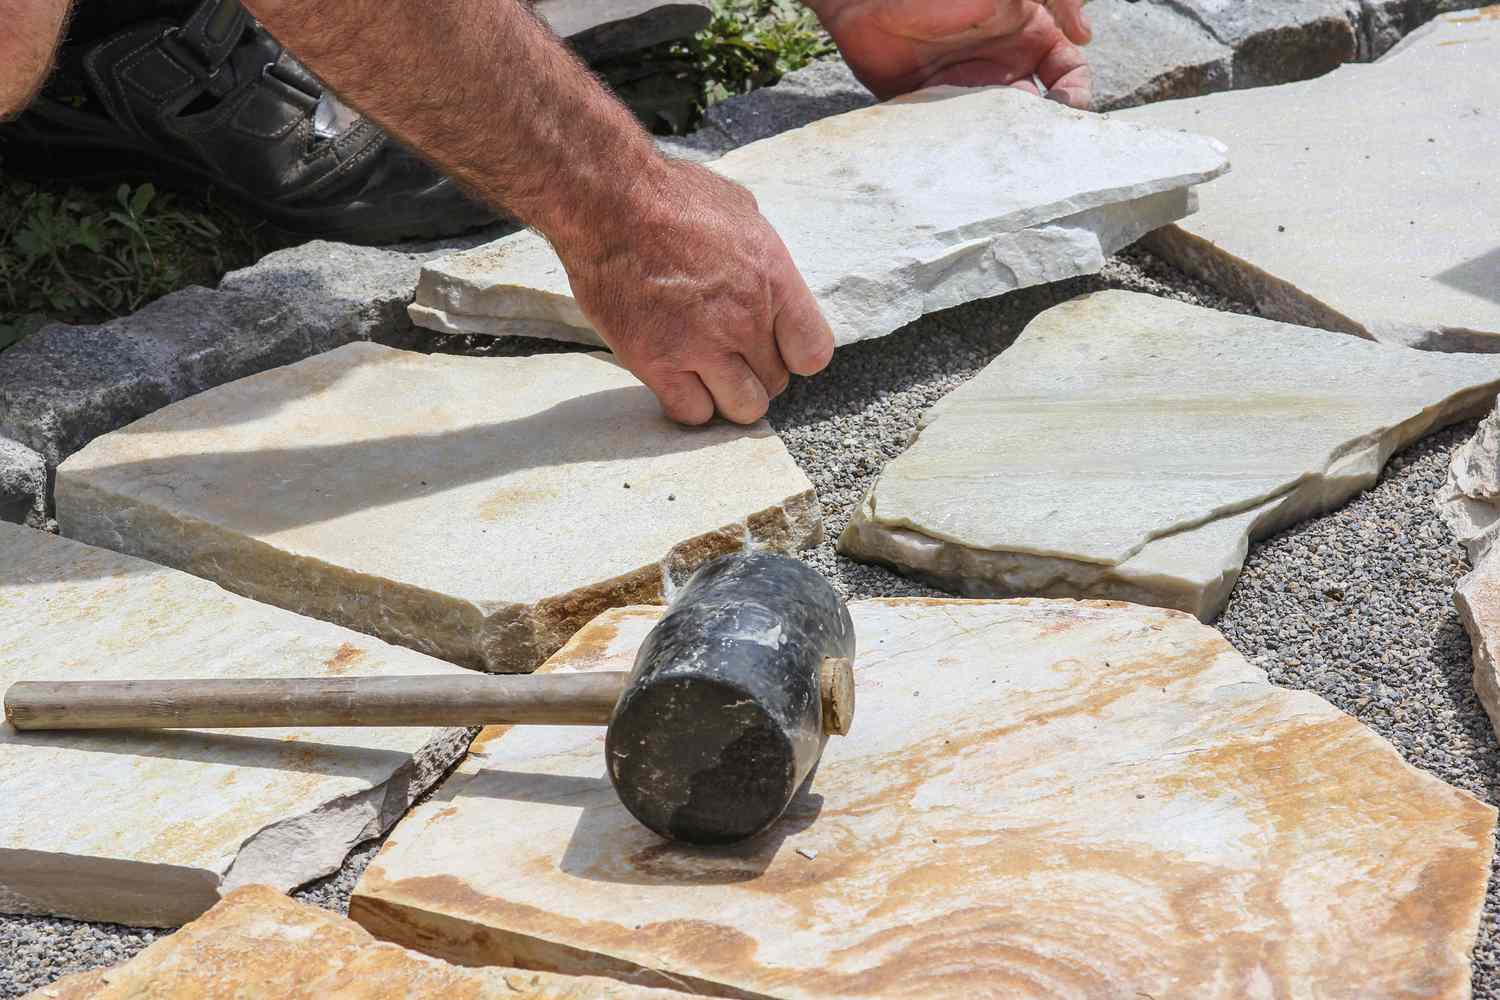 Laying marble plates